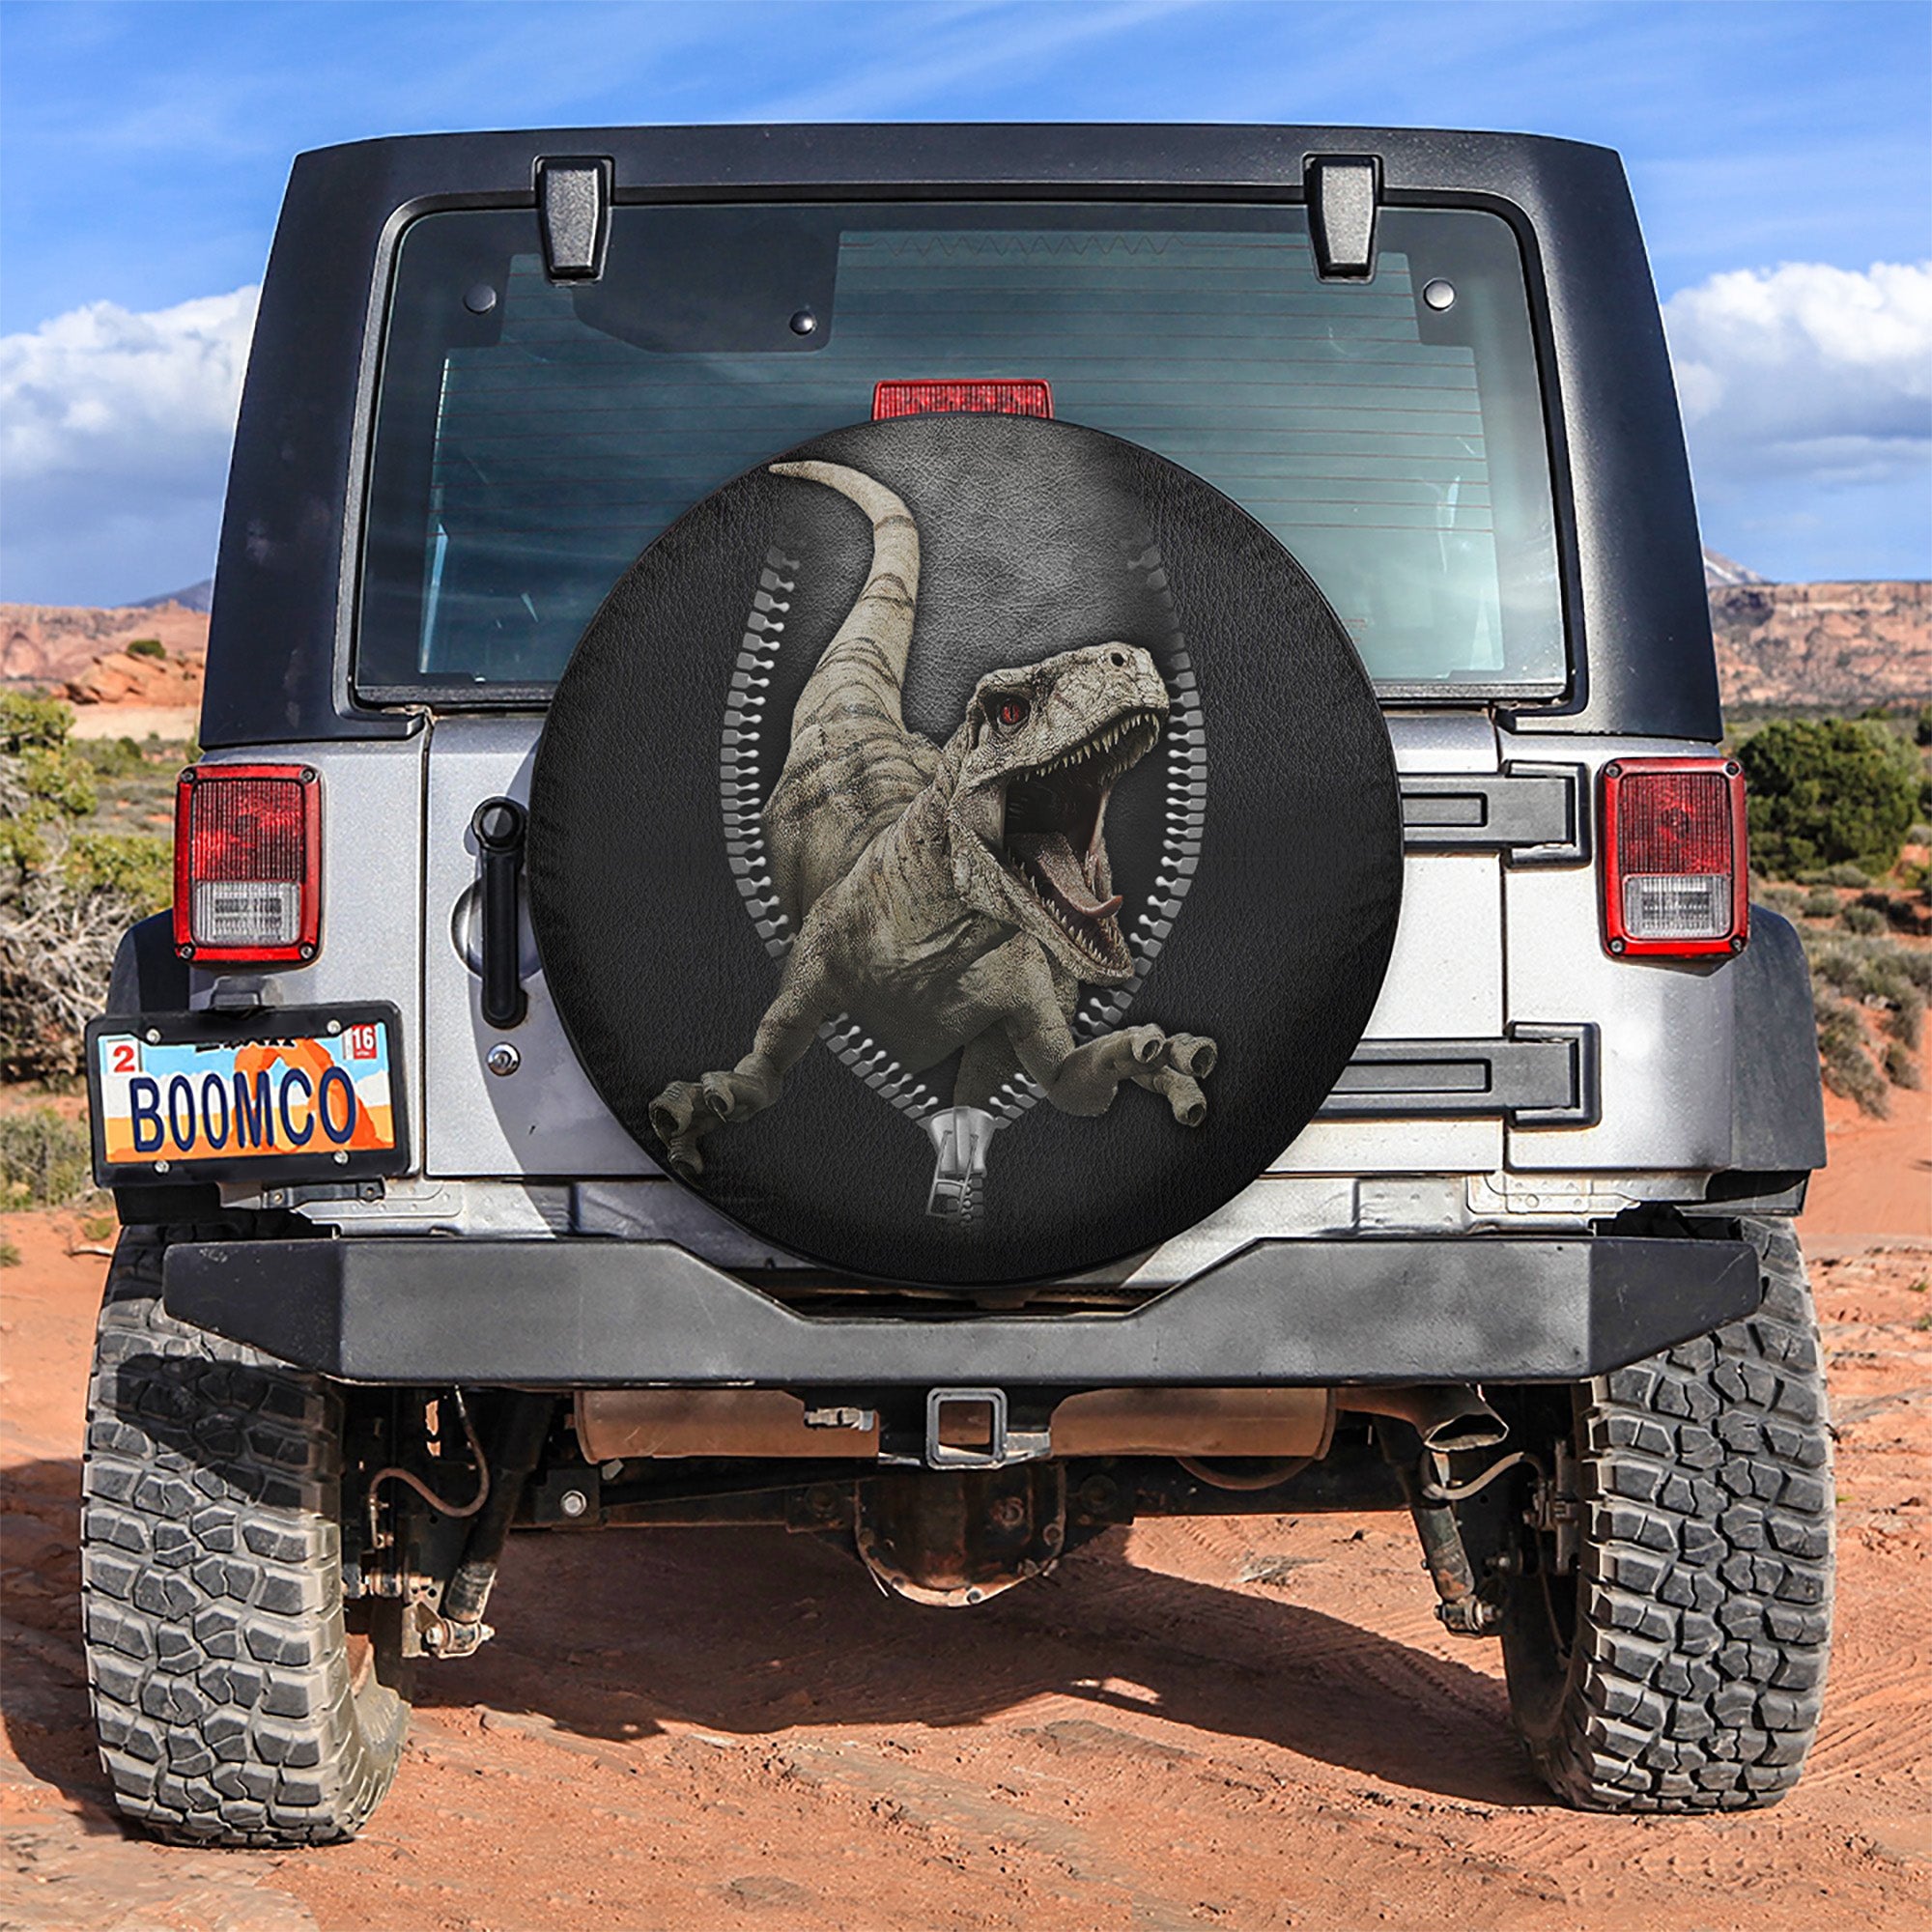 Velociraptor Angry 3D Dinosaur Jurassic World Zipper Car Spare Tire Covers Gift For Campers Nearkii